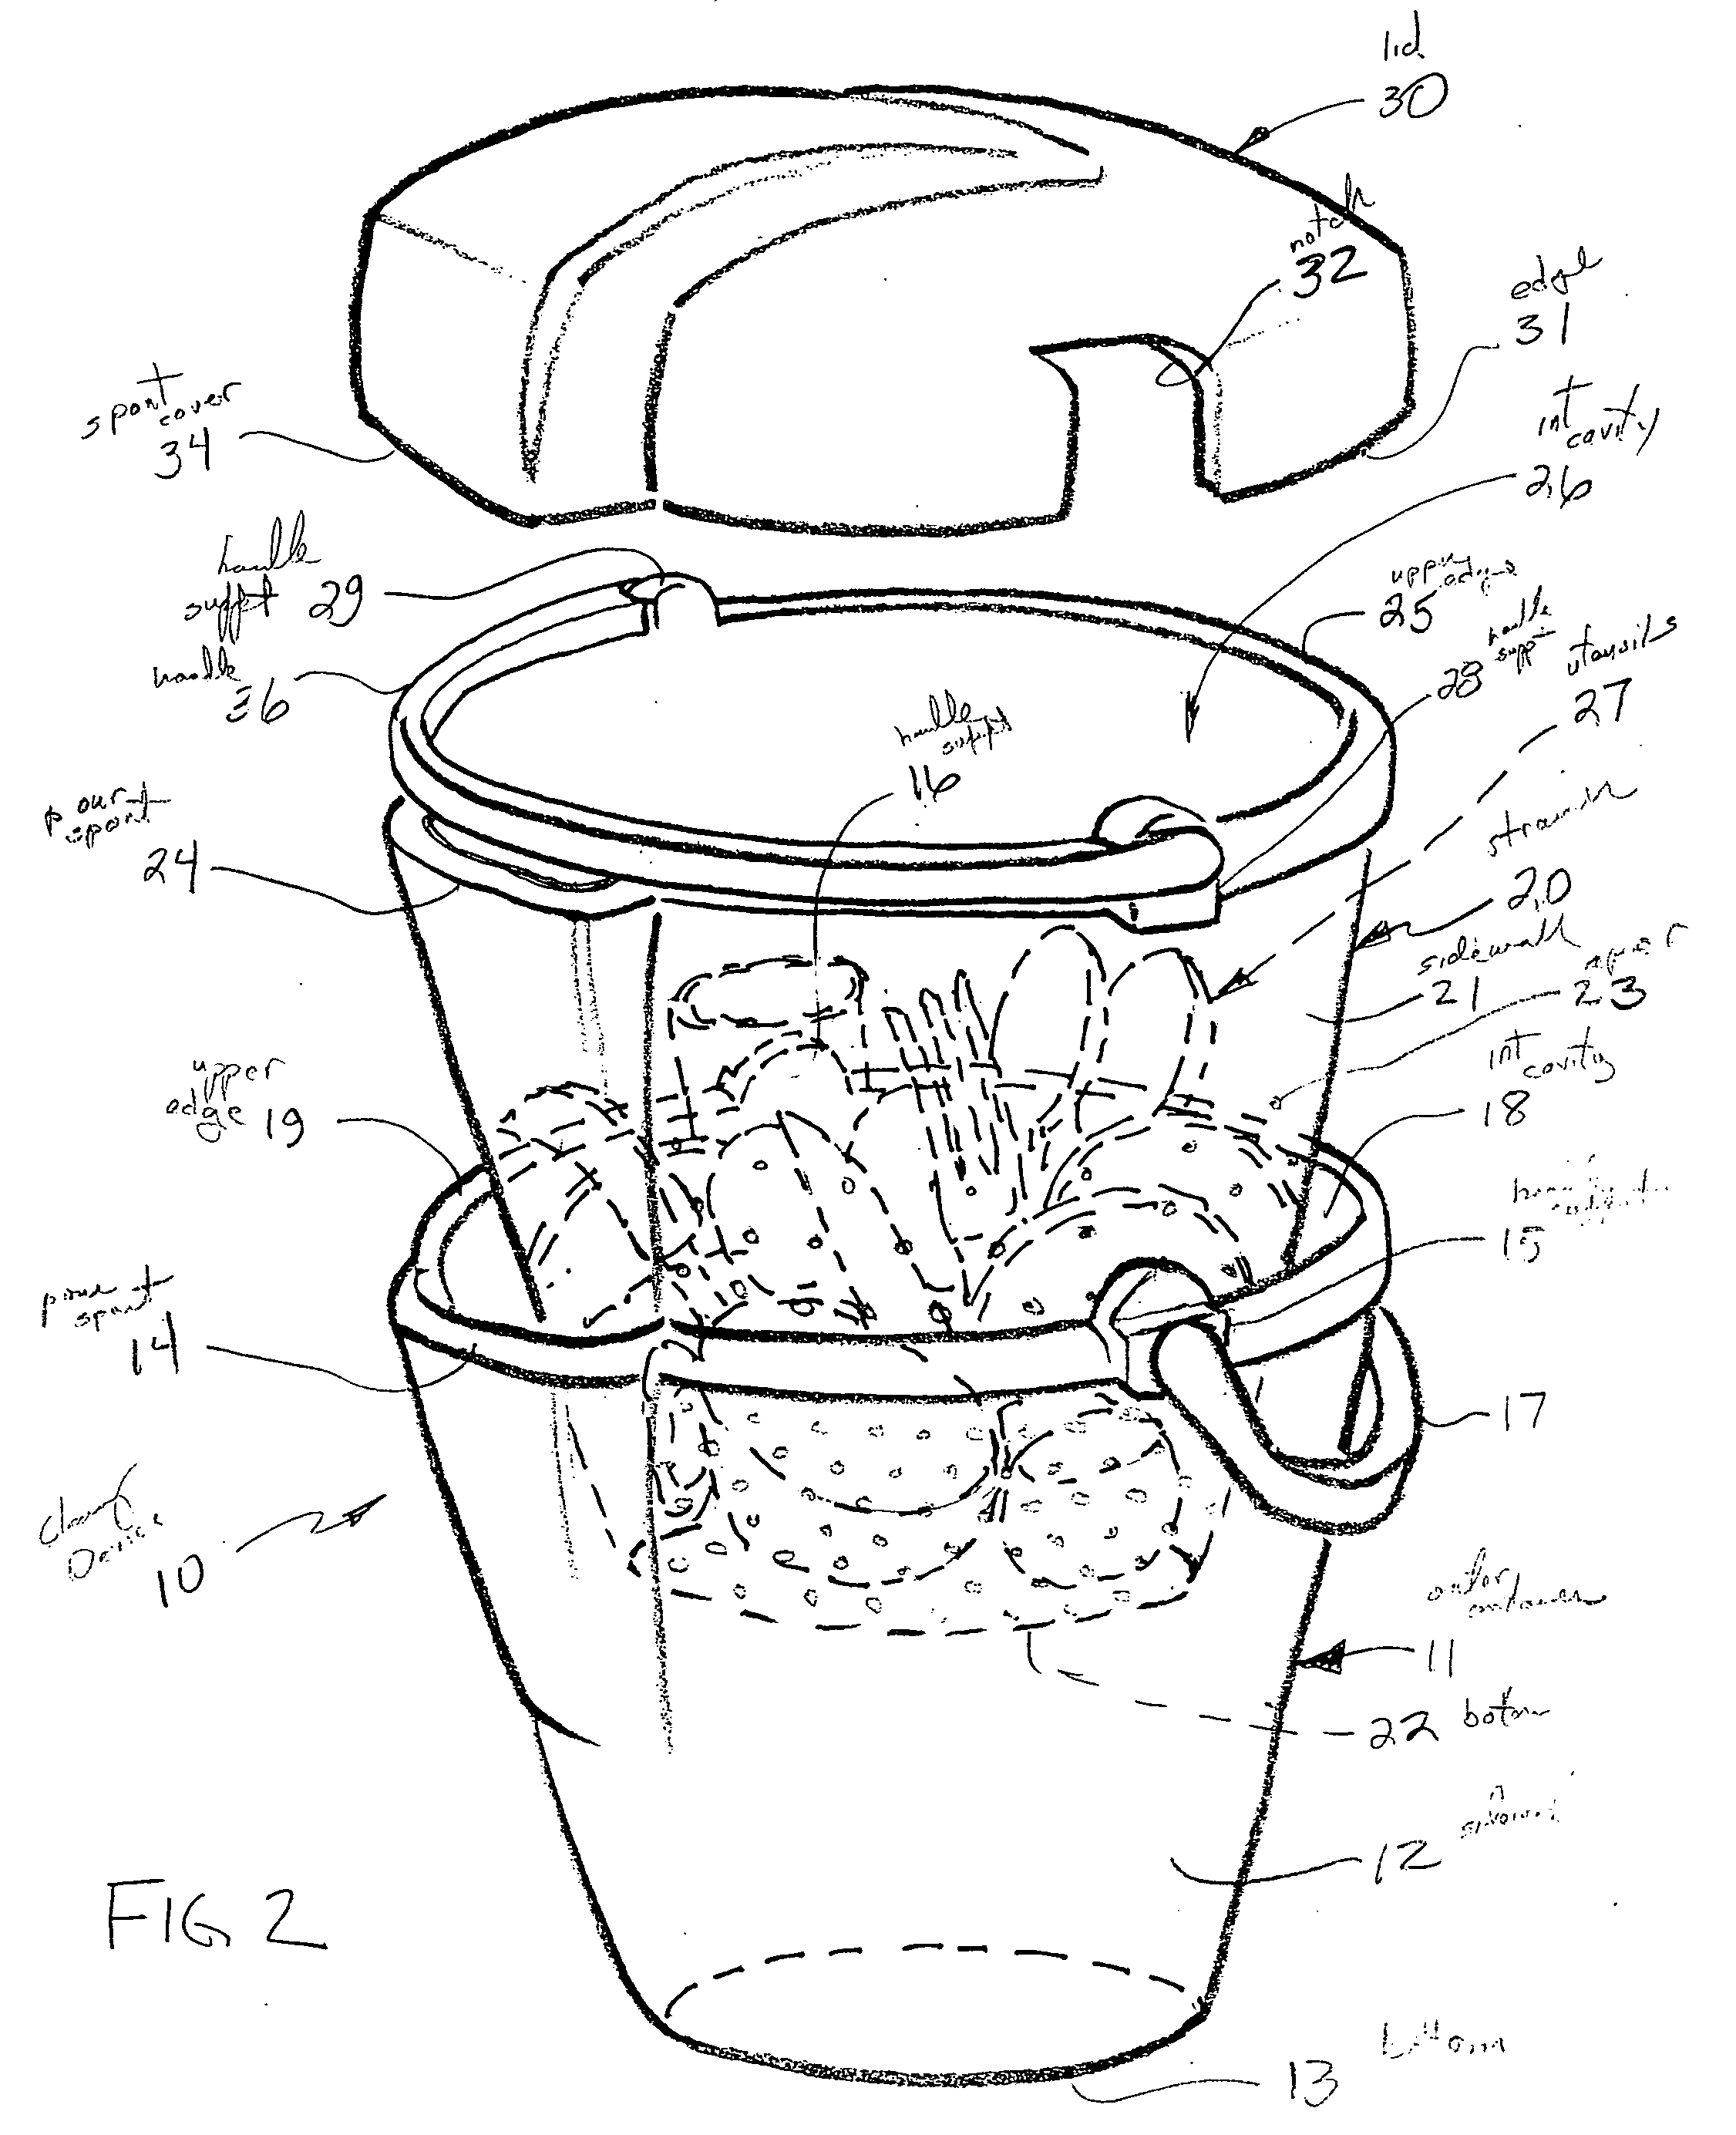 Cleaning device for utensils during camping activities